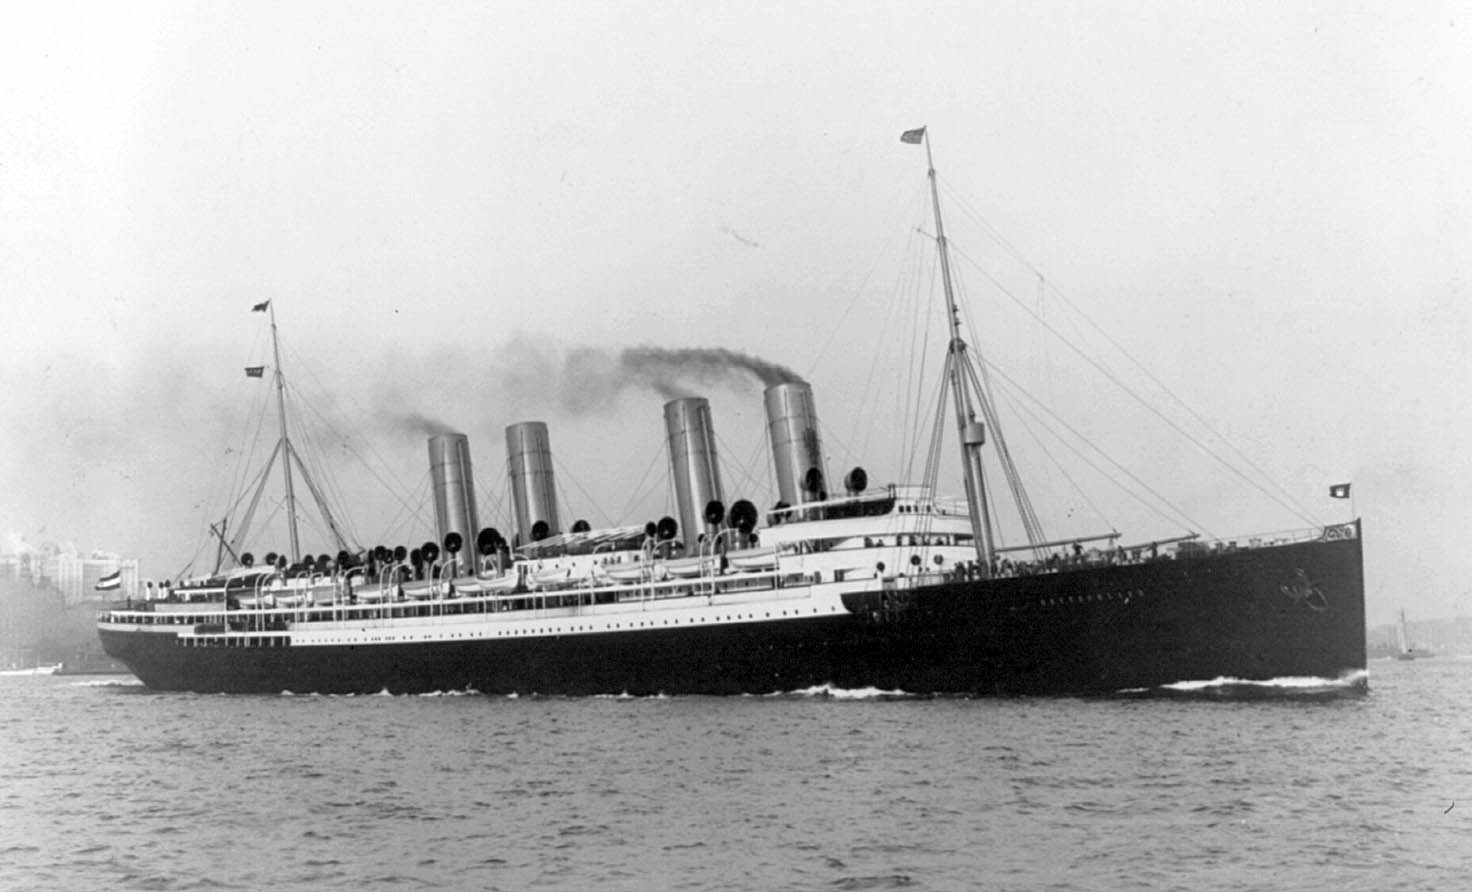 The SS Deutschland was a passenger liner launched in January 1900 as the flagship of the Hamburg America Line (HAPAG). The ship held the transatlantic speed record for seven years. Under the direction of legendary shipping magnate Albert Ballin, HAPAG made efforts to enhance the steerage experience for poor immigrants.